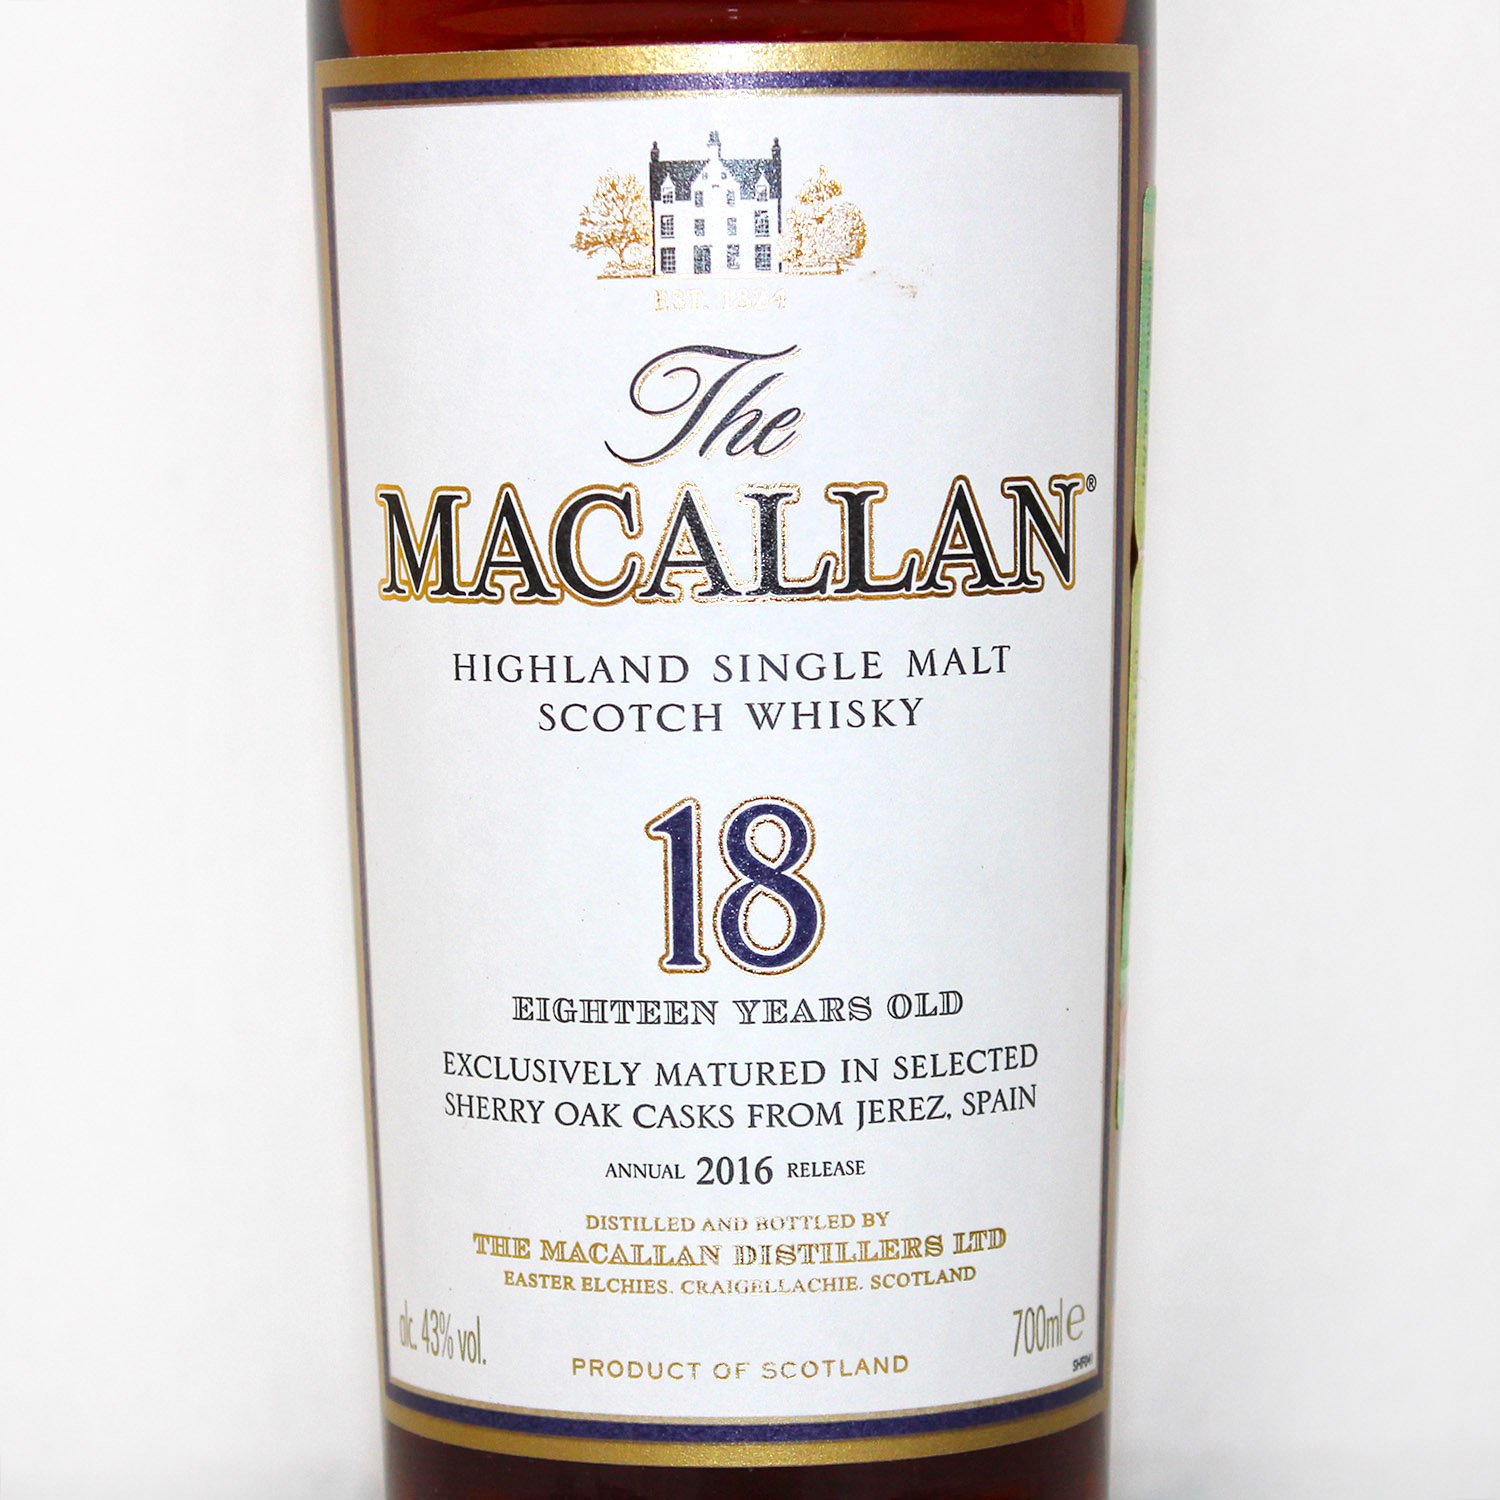 Macallan Annual 2016 Release 18 Years label